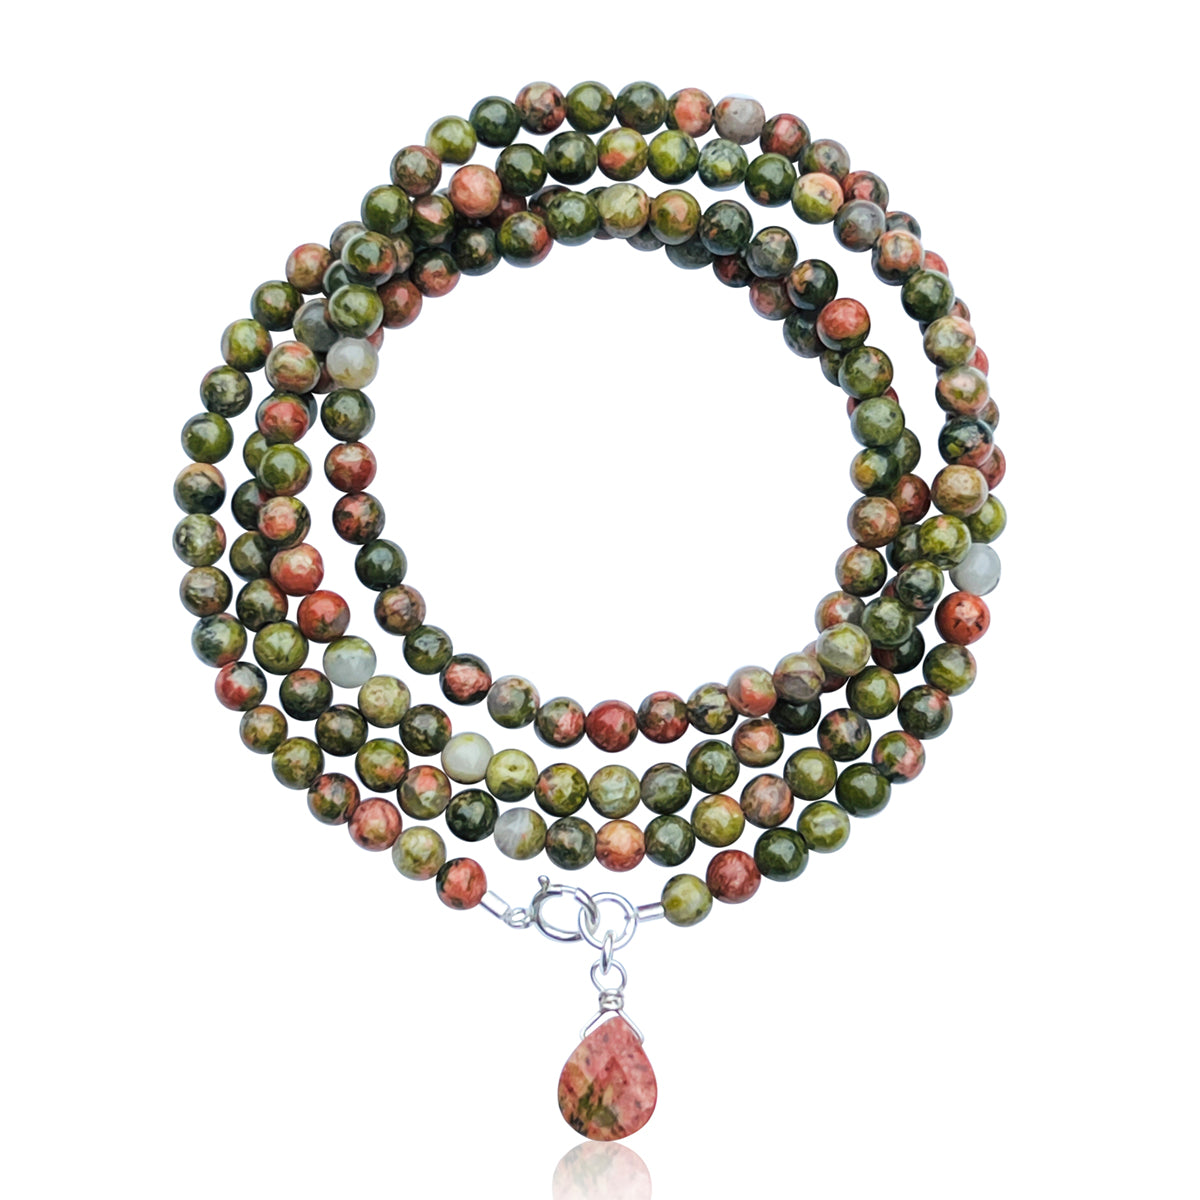 Experience the harmonious connections and deep healing energies of our Unakite Harmony Wrap Bracelet. Crafted from the beautiful Unakite gemstone, this bracelet combines the soothing vitality of greens with the affection and empathy of pinks, creating a powerful fusion of energies.